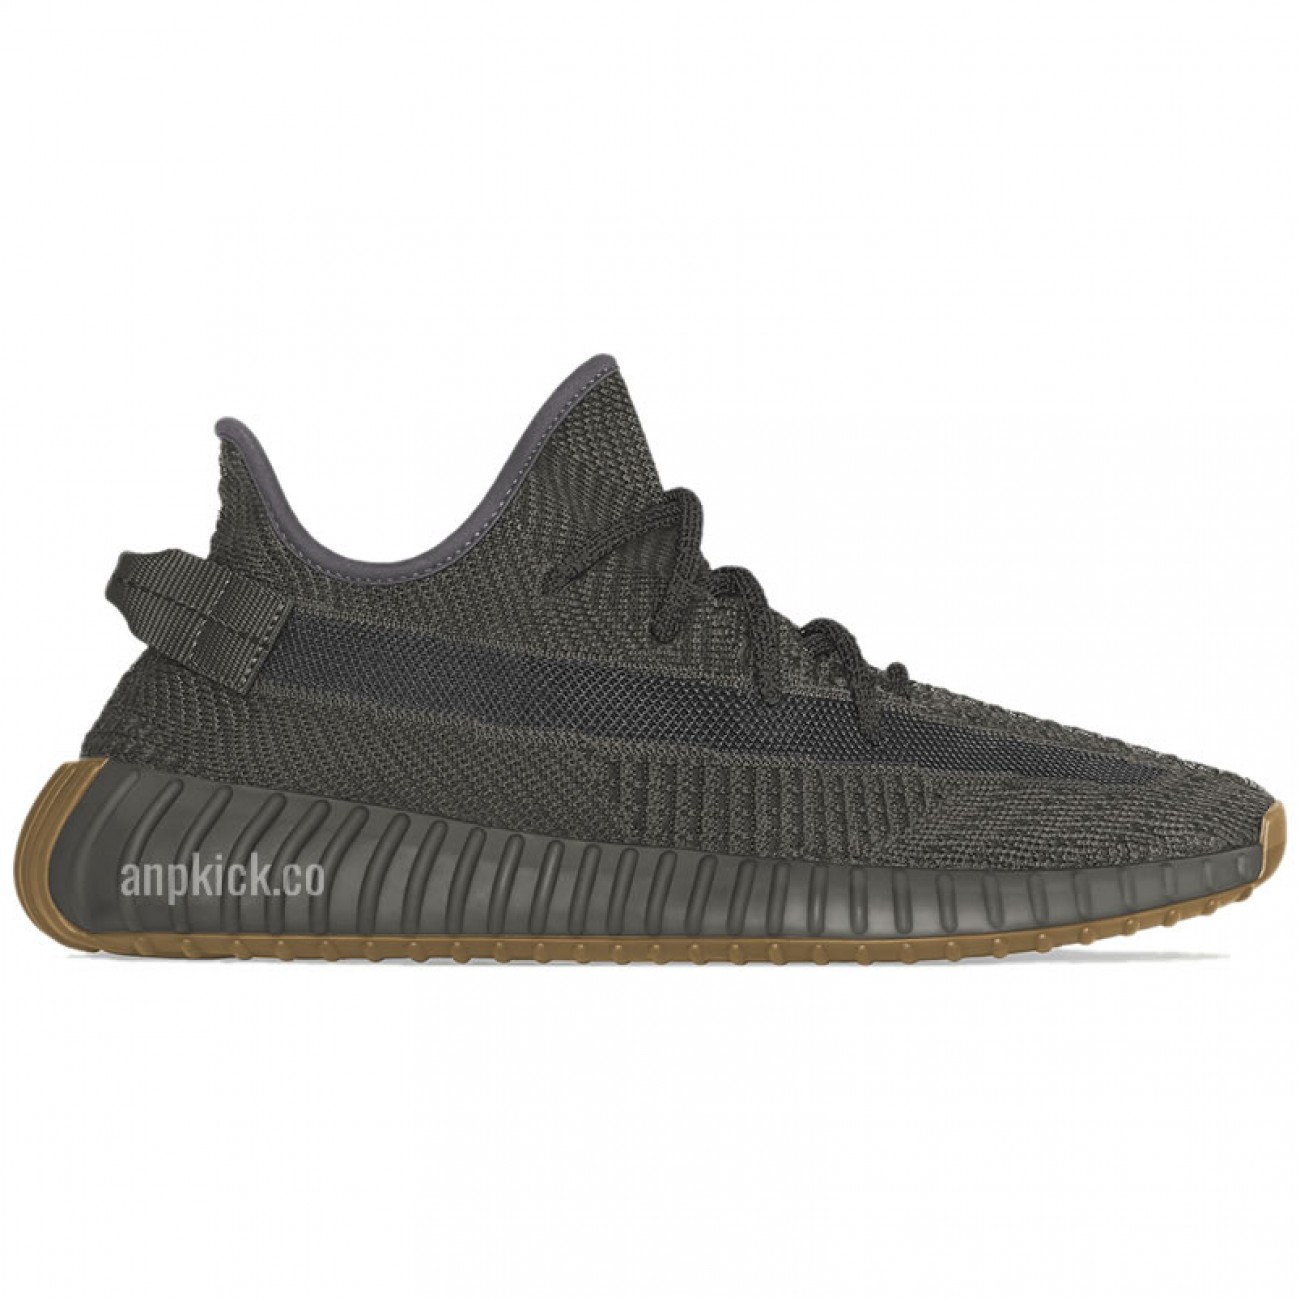 adidas Yeezy Boost 350 V2 "Cinder" Non-Reflective FY2903 New Release Date